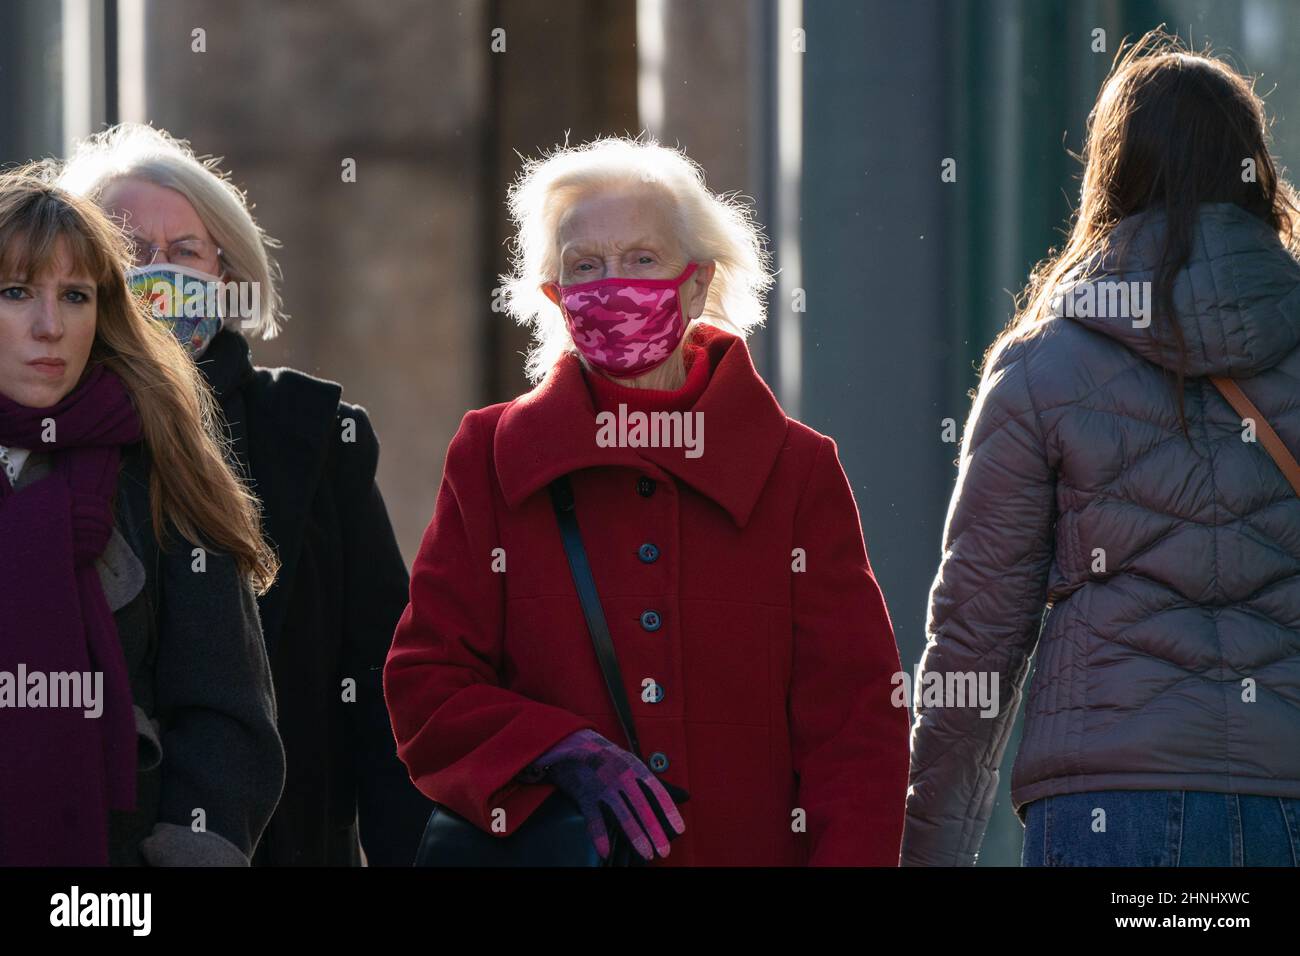 Shelagh Robertson (centre) arrives at Cambridge Magistrates' Court, after she was served a summons to appear at court for the offence of causing death by careless driving, following the death of five-month-old Louis Thorold on the A10 in Waterbeach, Cambridgeshire on January 22, 2021. Picture date: Thursday February 17, 2022. Stock Photo